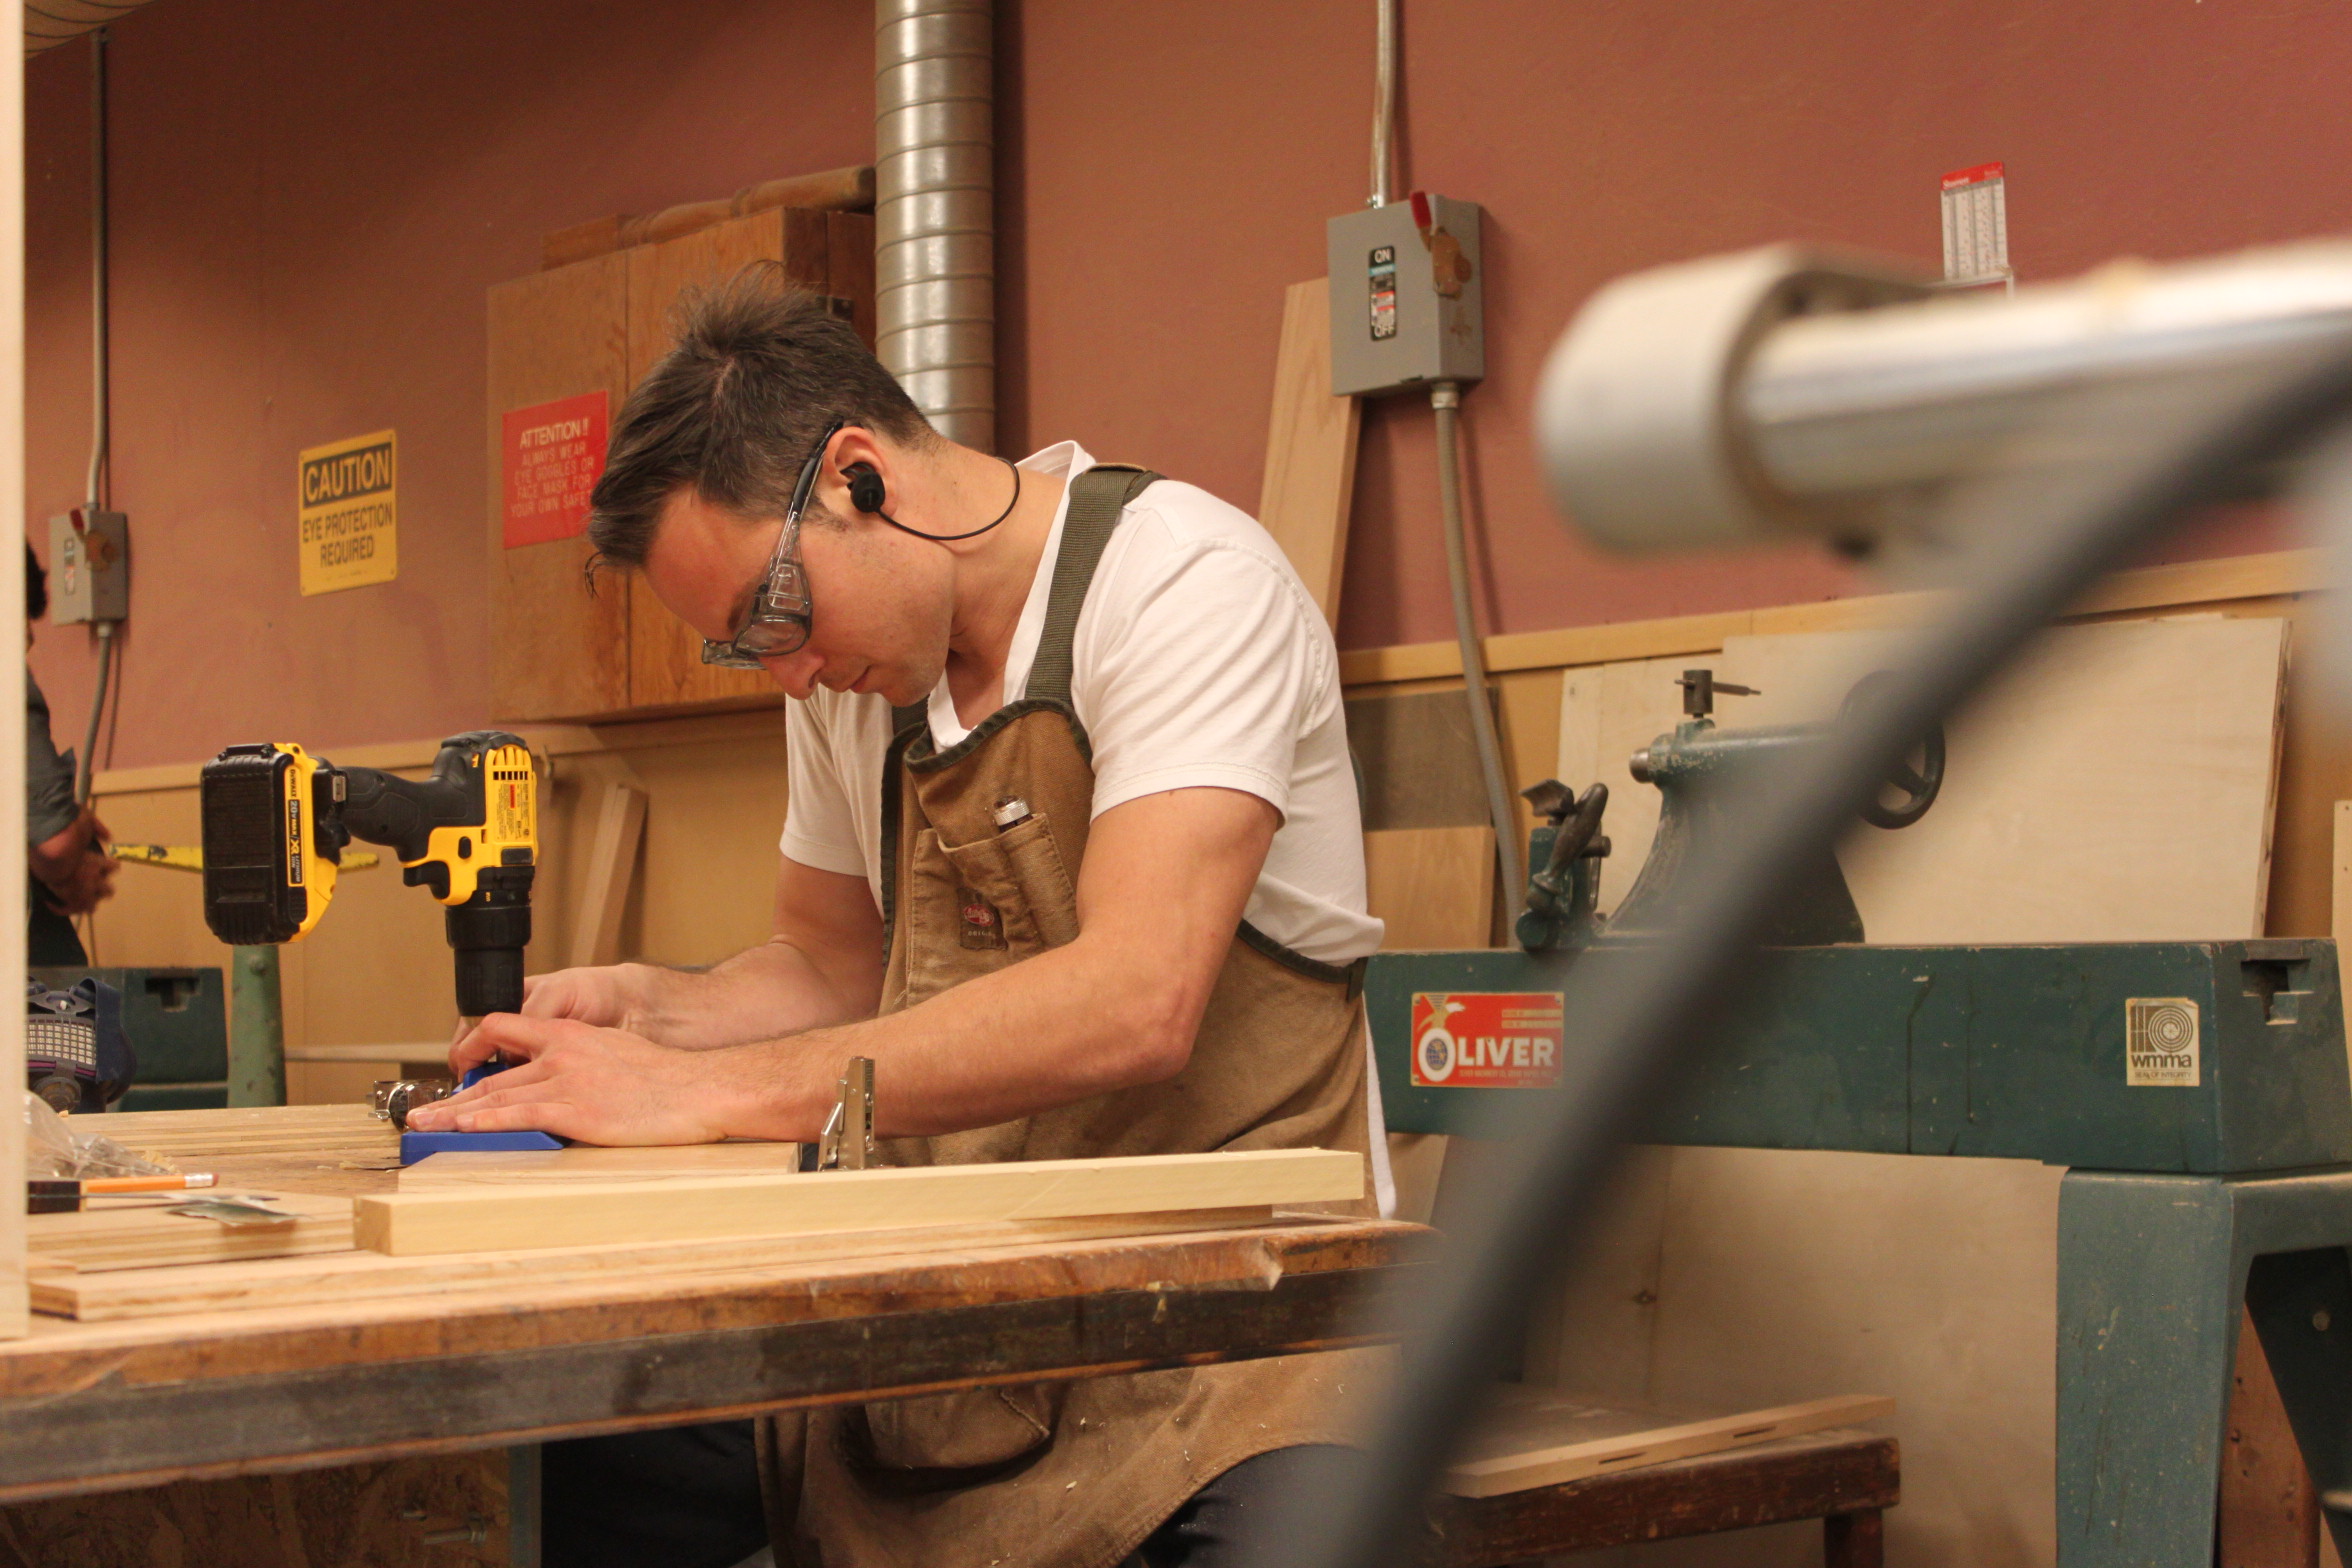 City college student Cem Turhal carefully uses a drill to place hinges on the doors he has crafted for his entertainment center. Turhal has already learned skills from the beginning carpentry class that he uses here. Photo taken by Bethaney Lee on Nov. 6, 2017. 